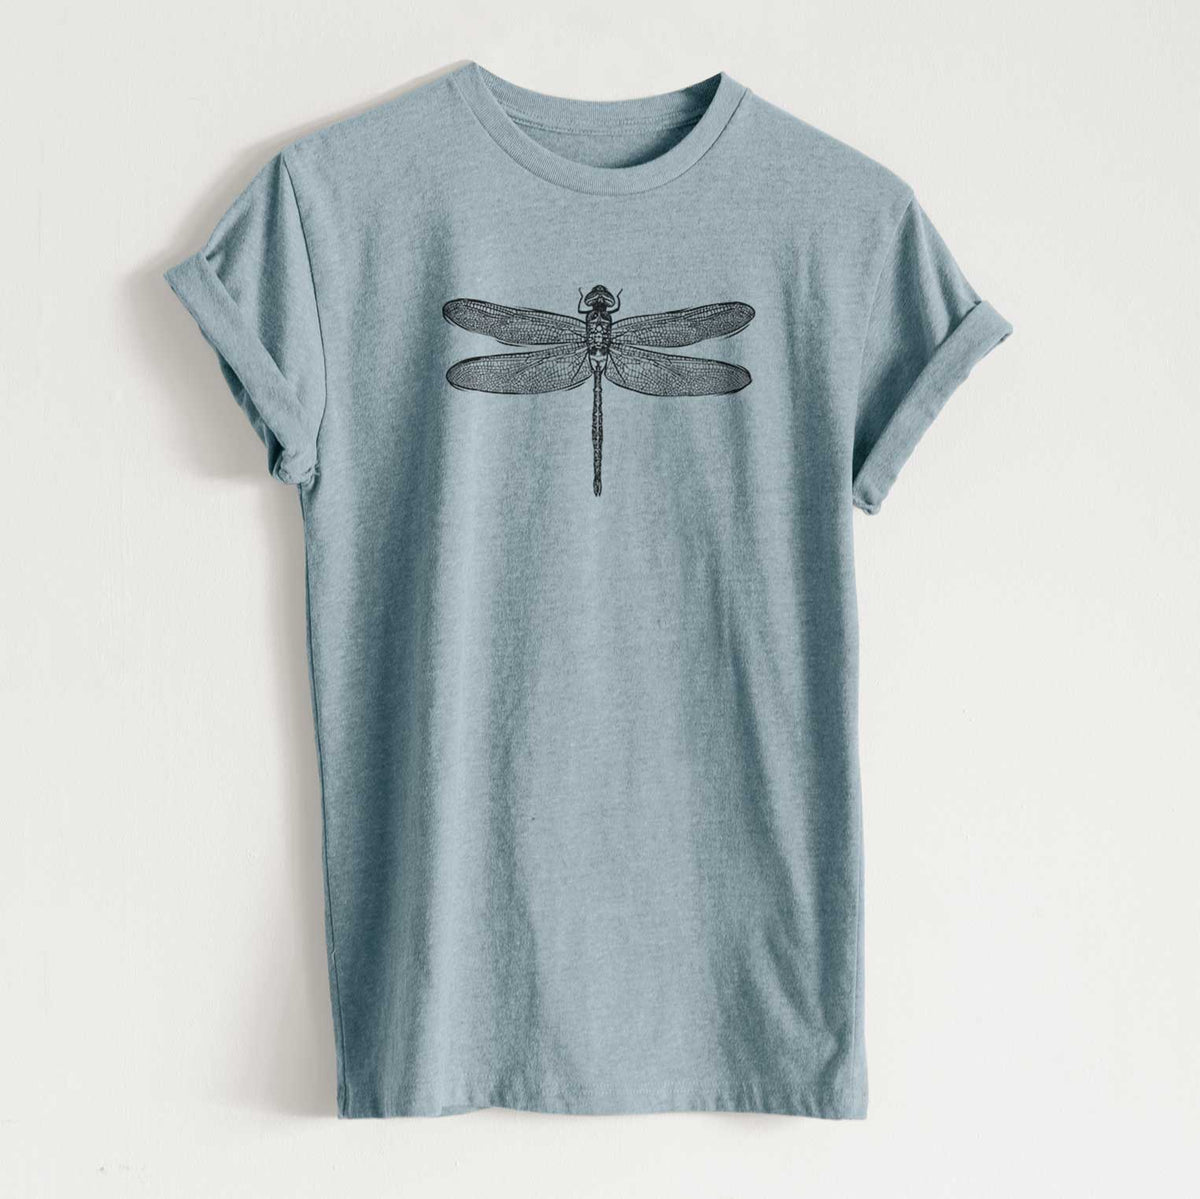 Anax Junius - Green Darner Dragonfly - Unisex Recycled Eco Tee  - CLOSEOUT - FINAL SALE